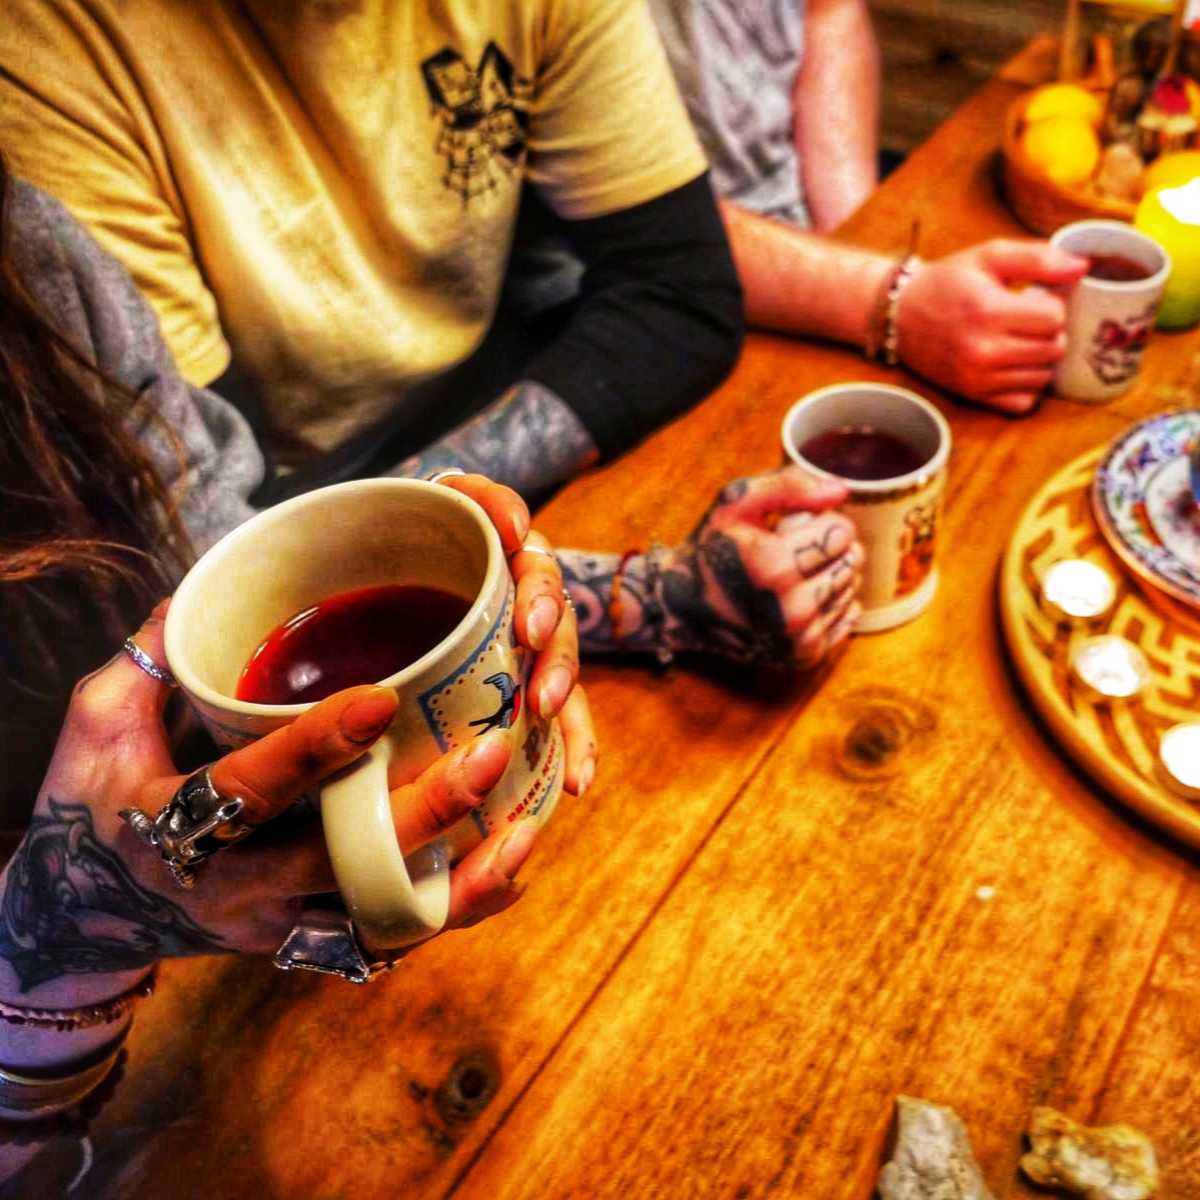 Tattooed people drinking loose leaf tea with patterned mugs and tealight candles on a wooden table